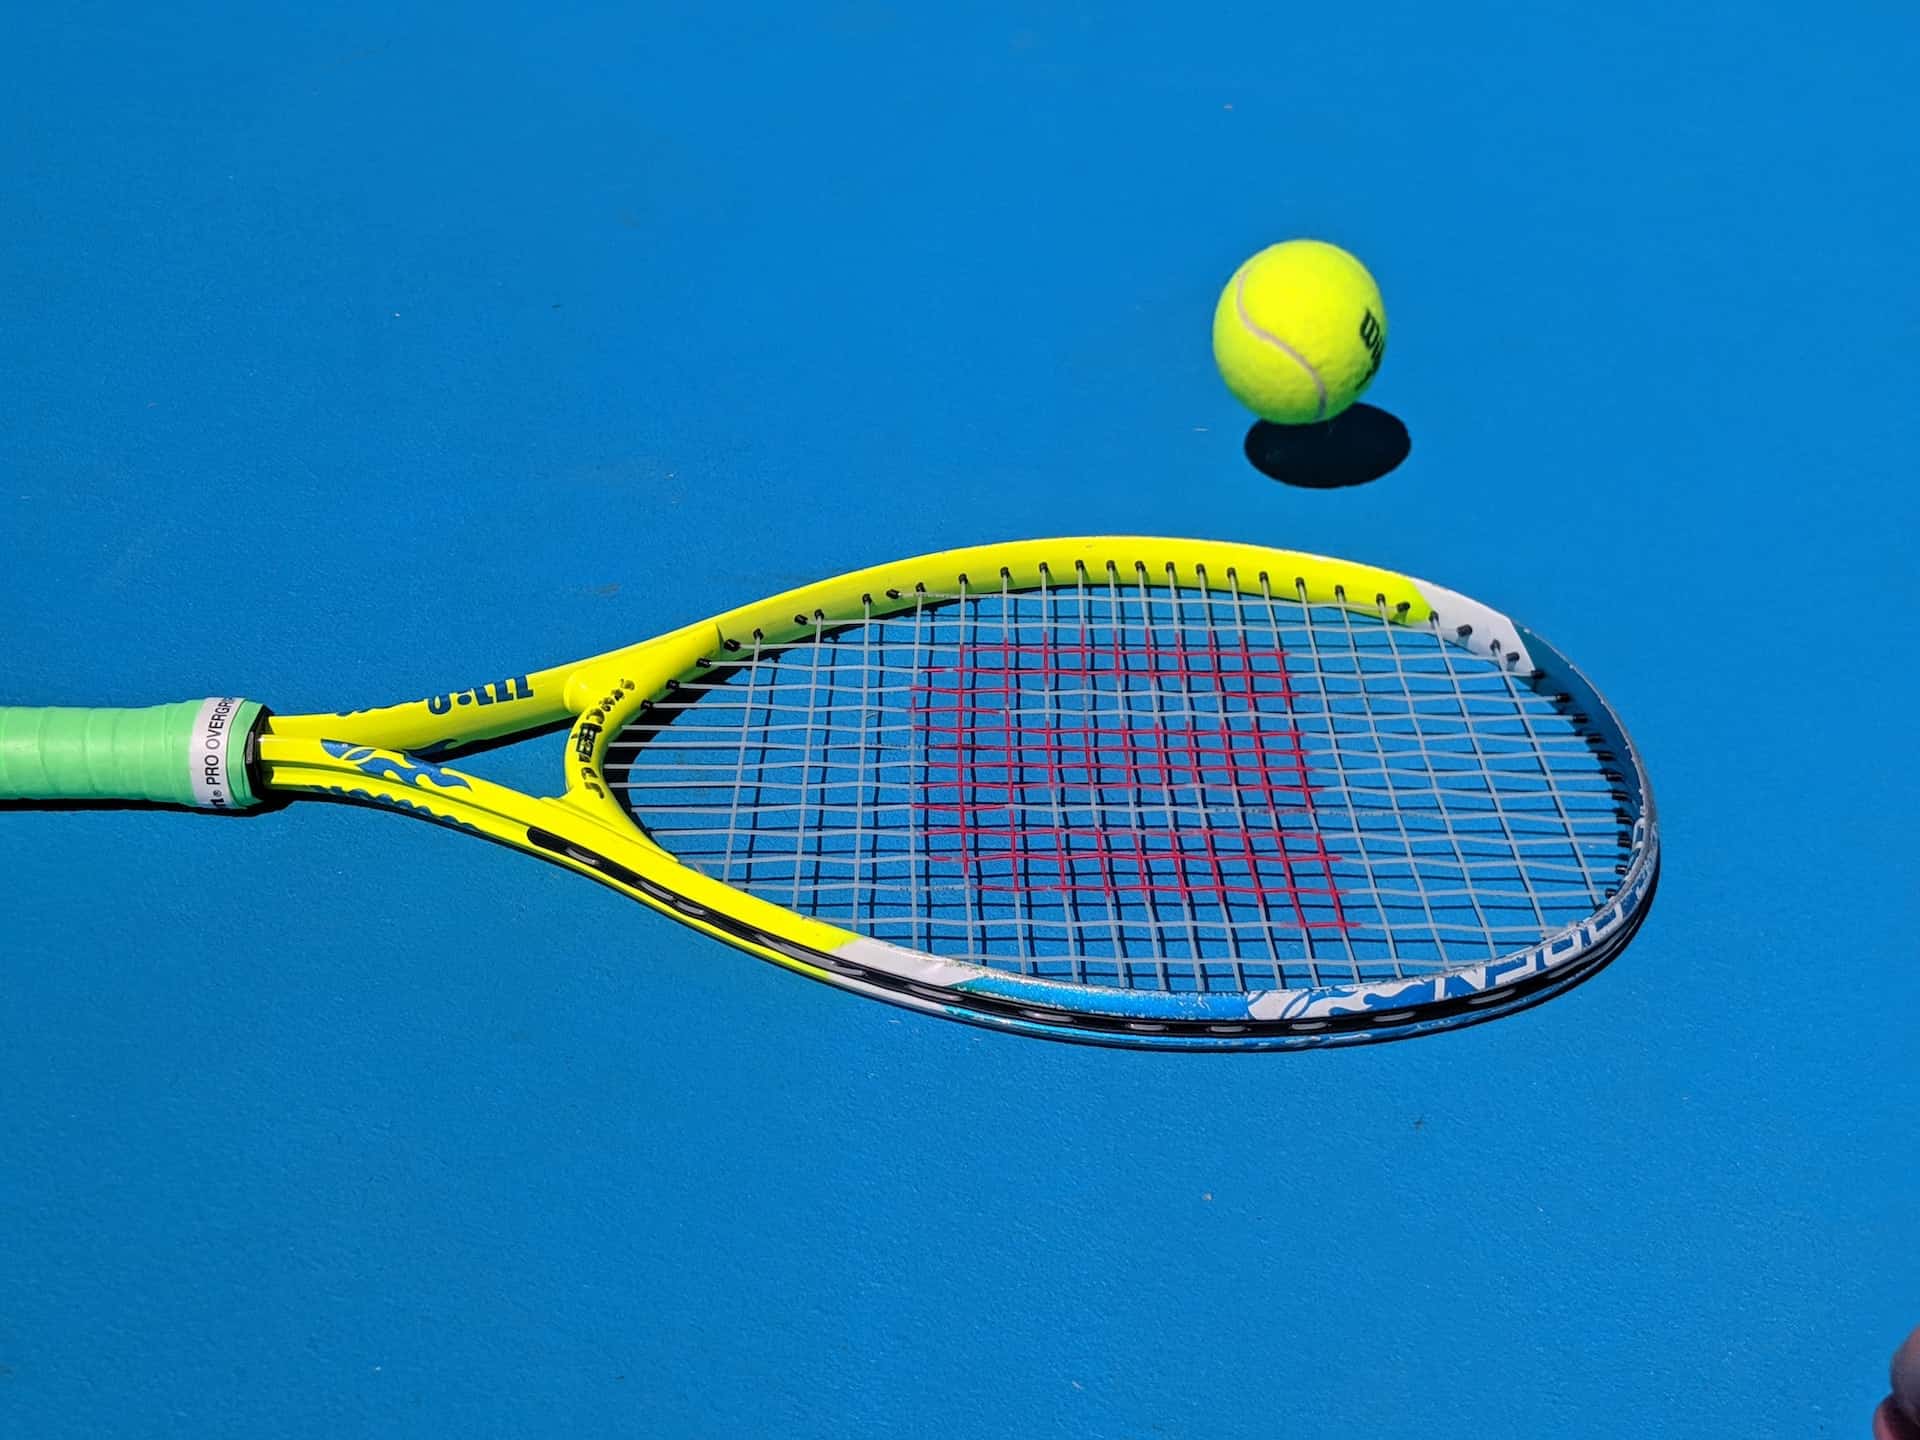 Why should you start playing tennis?